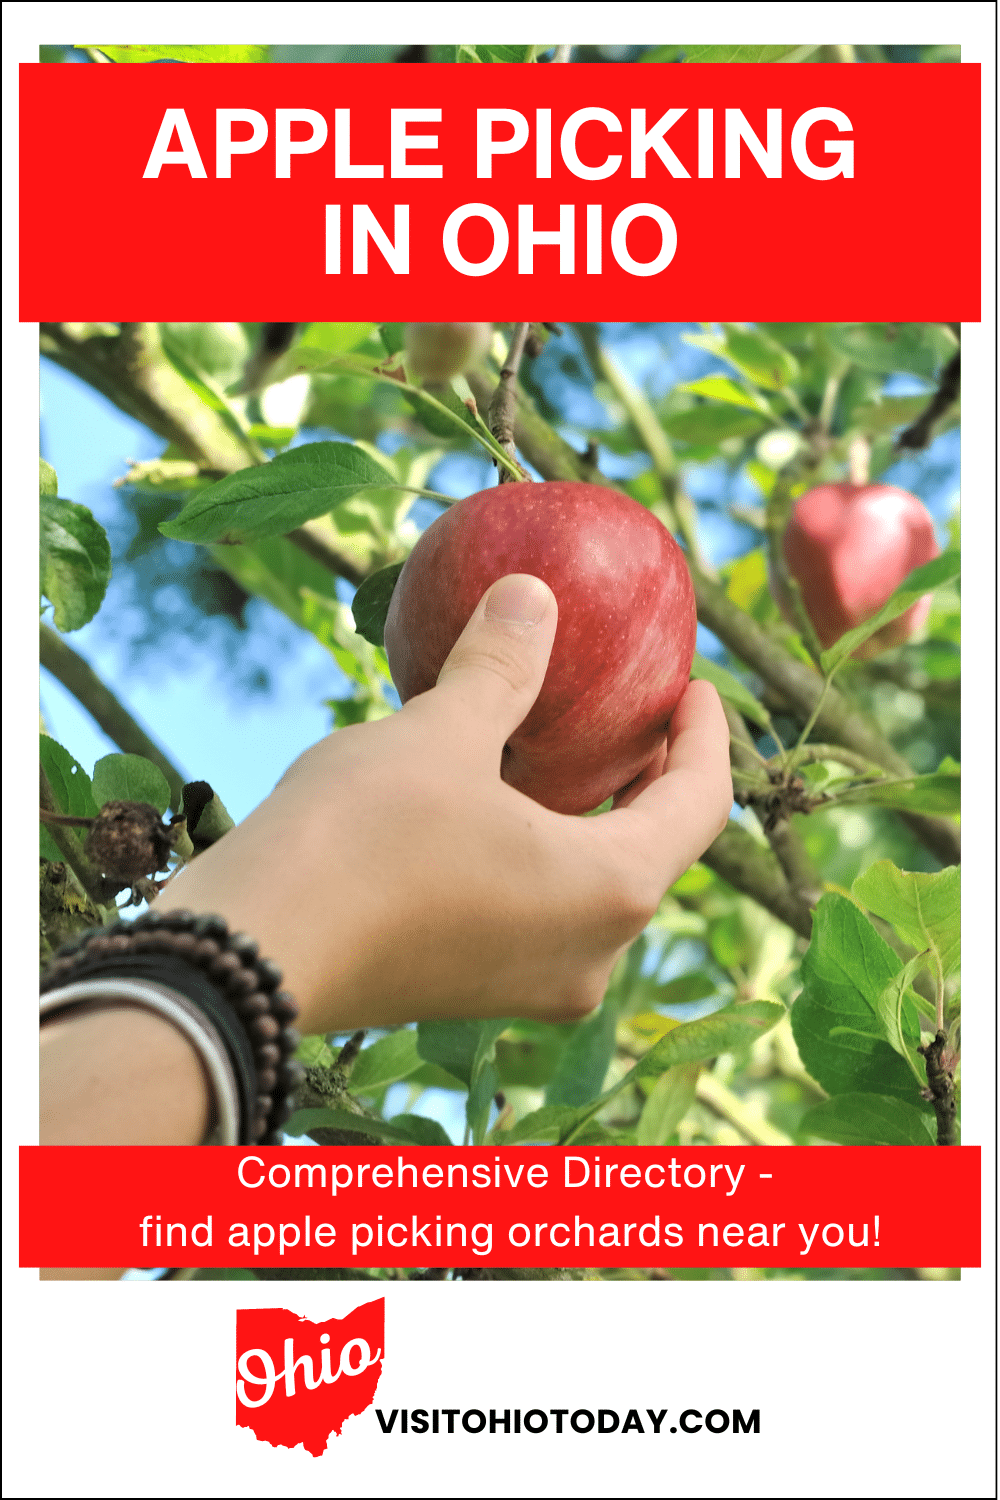 There are many orchards where you can go apple picking in Ohio. Most orchards offer other you-pick fruits, such as berries in the summer and pumpkins in the fall, as well as family-fun activities.